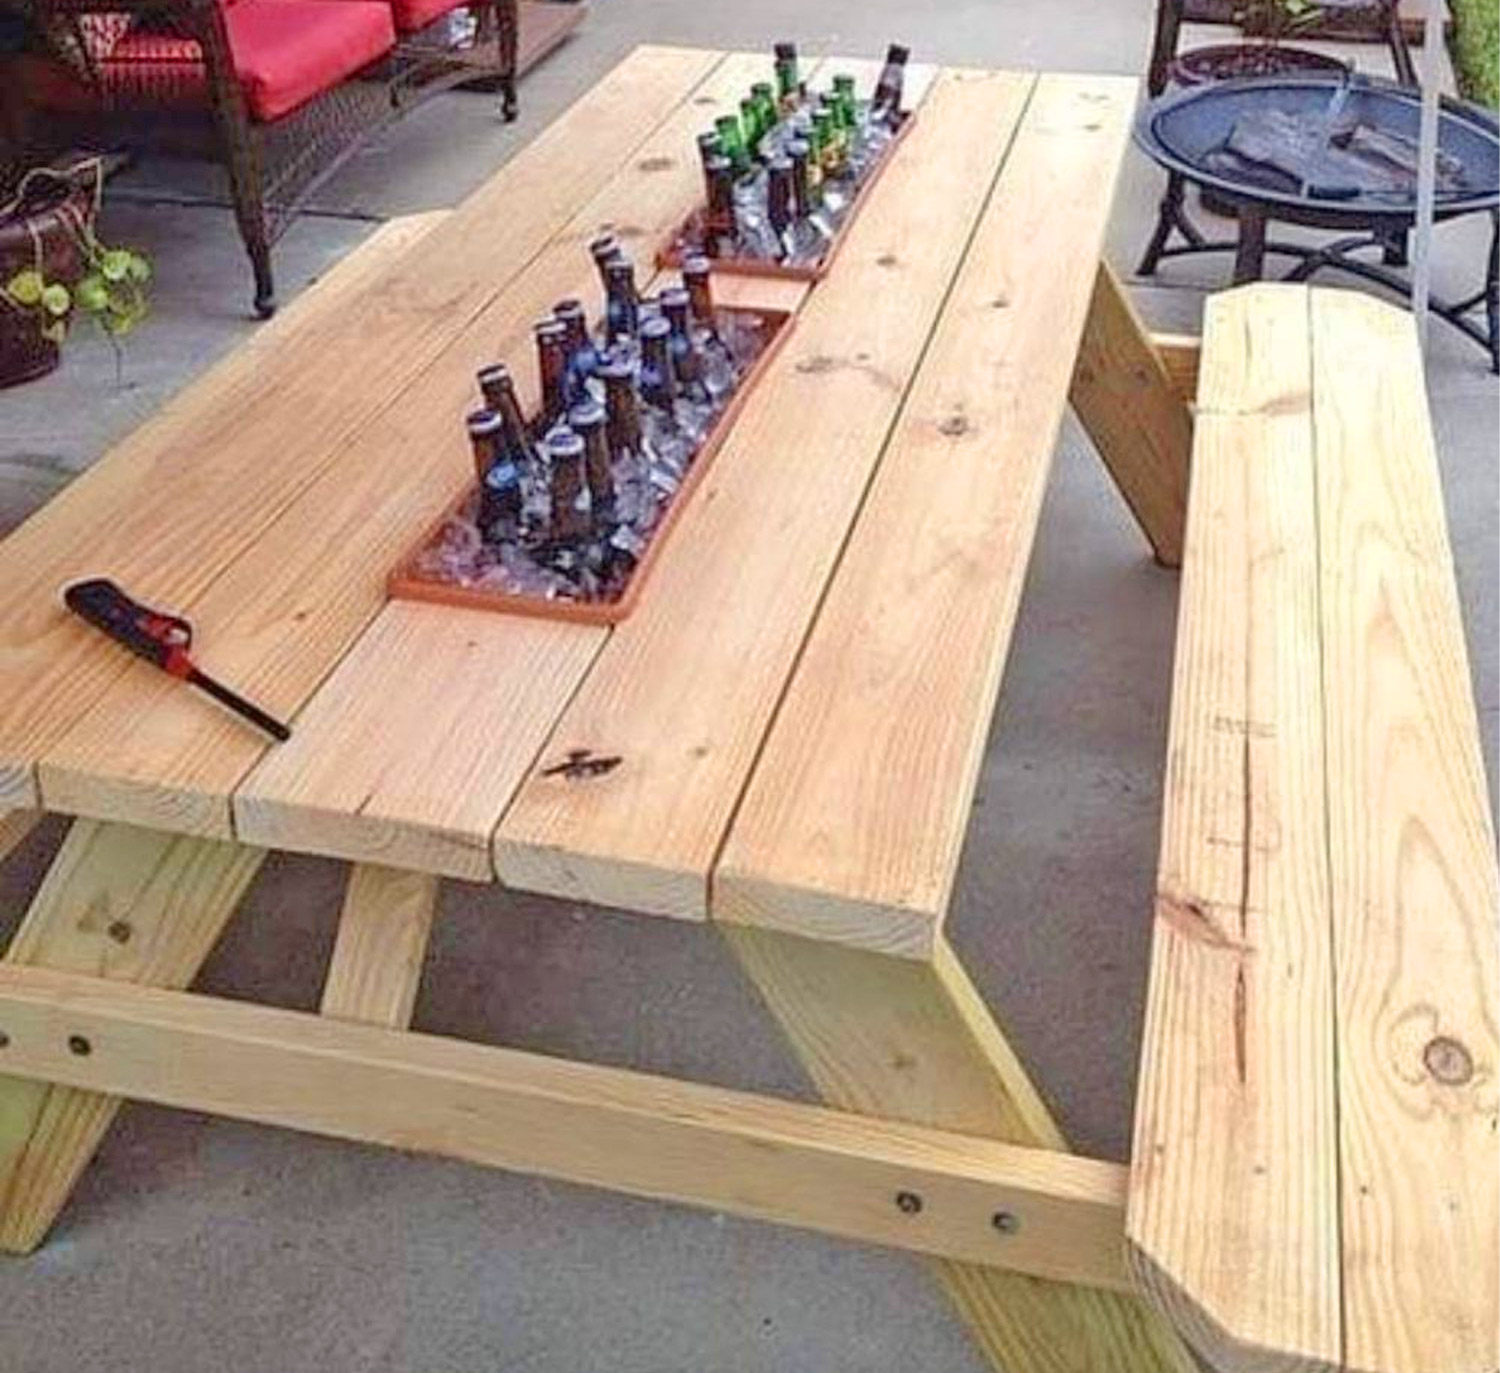 People Are Now Adding Drink Cooler Troughs To Their Picnic Tables, And